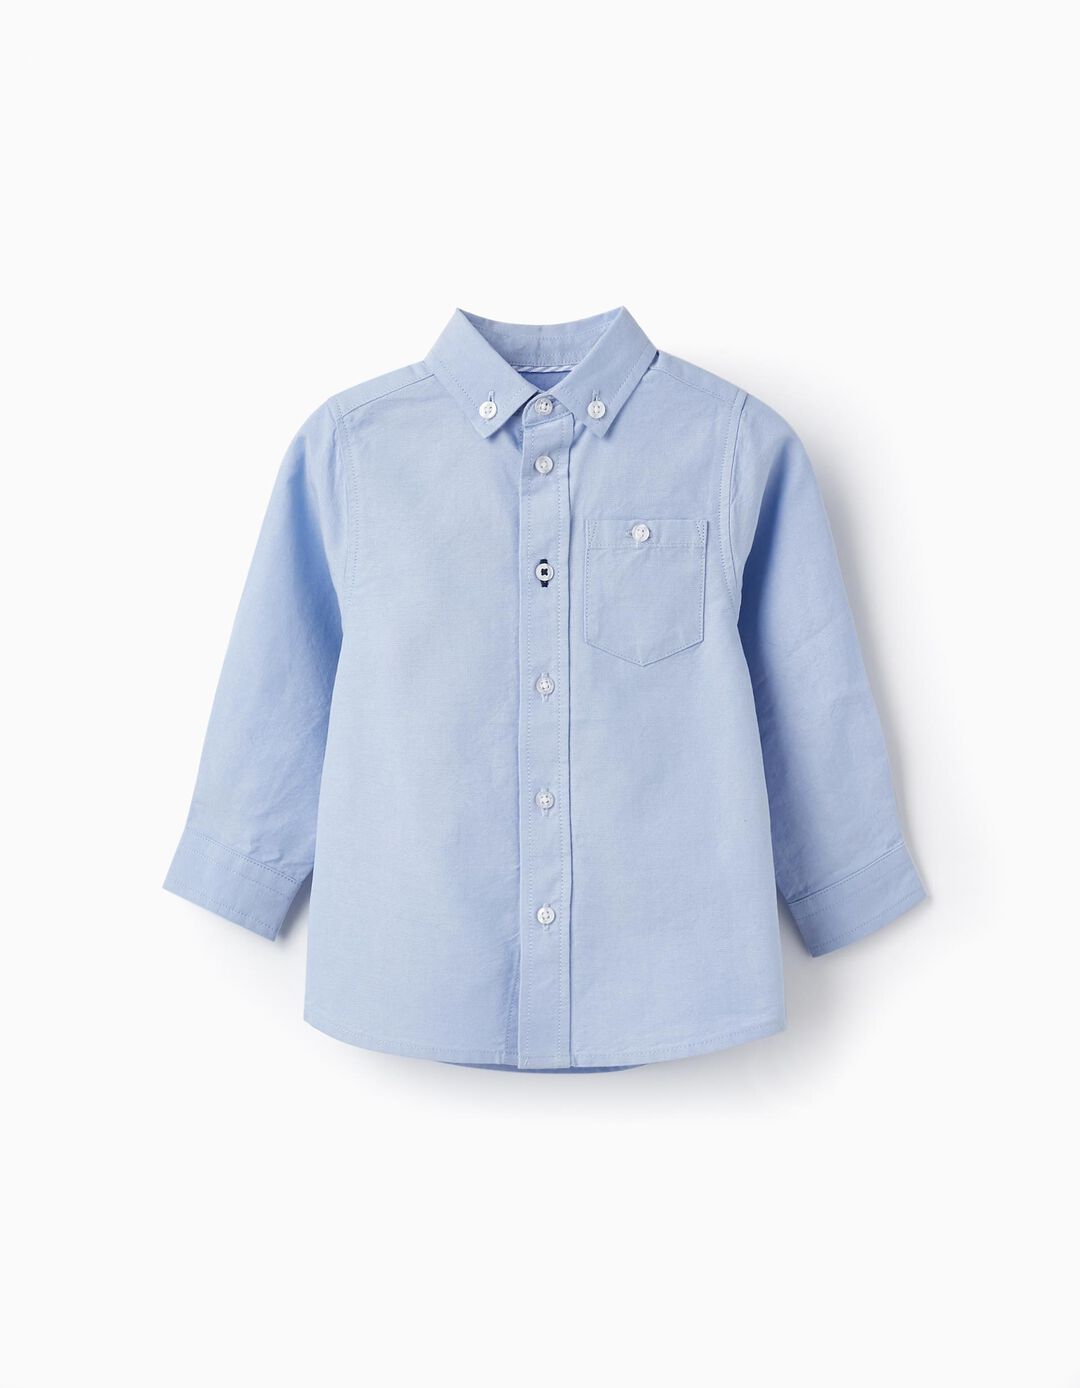 Long Sleeve Cotton Shirt for Baby Boys, Blue